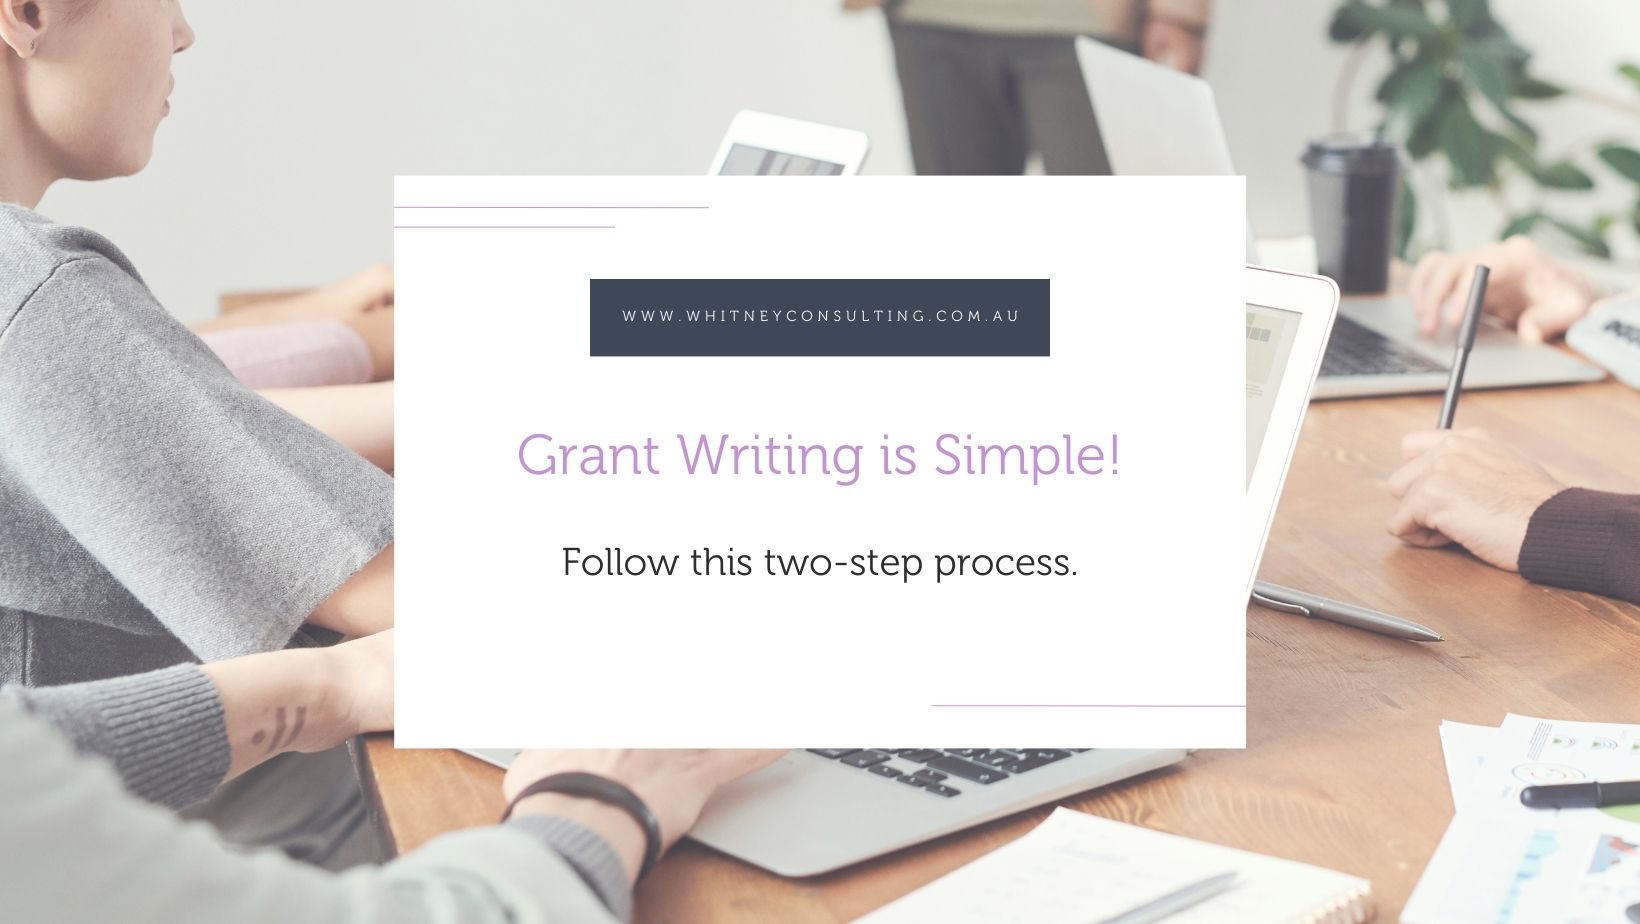 Grant Writing is Simple. Follow this two-step process.